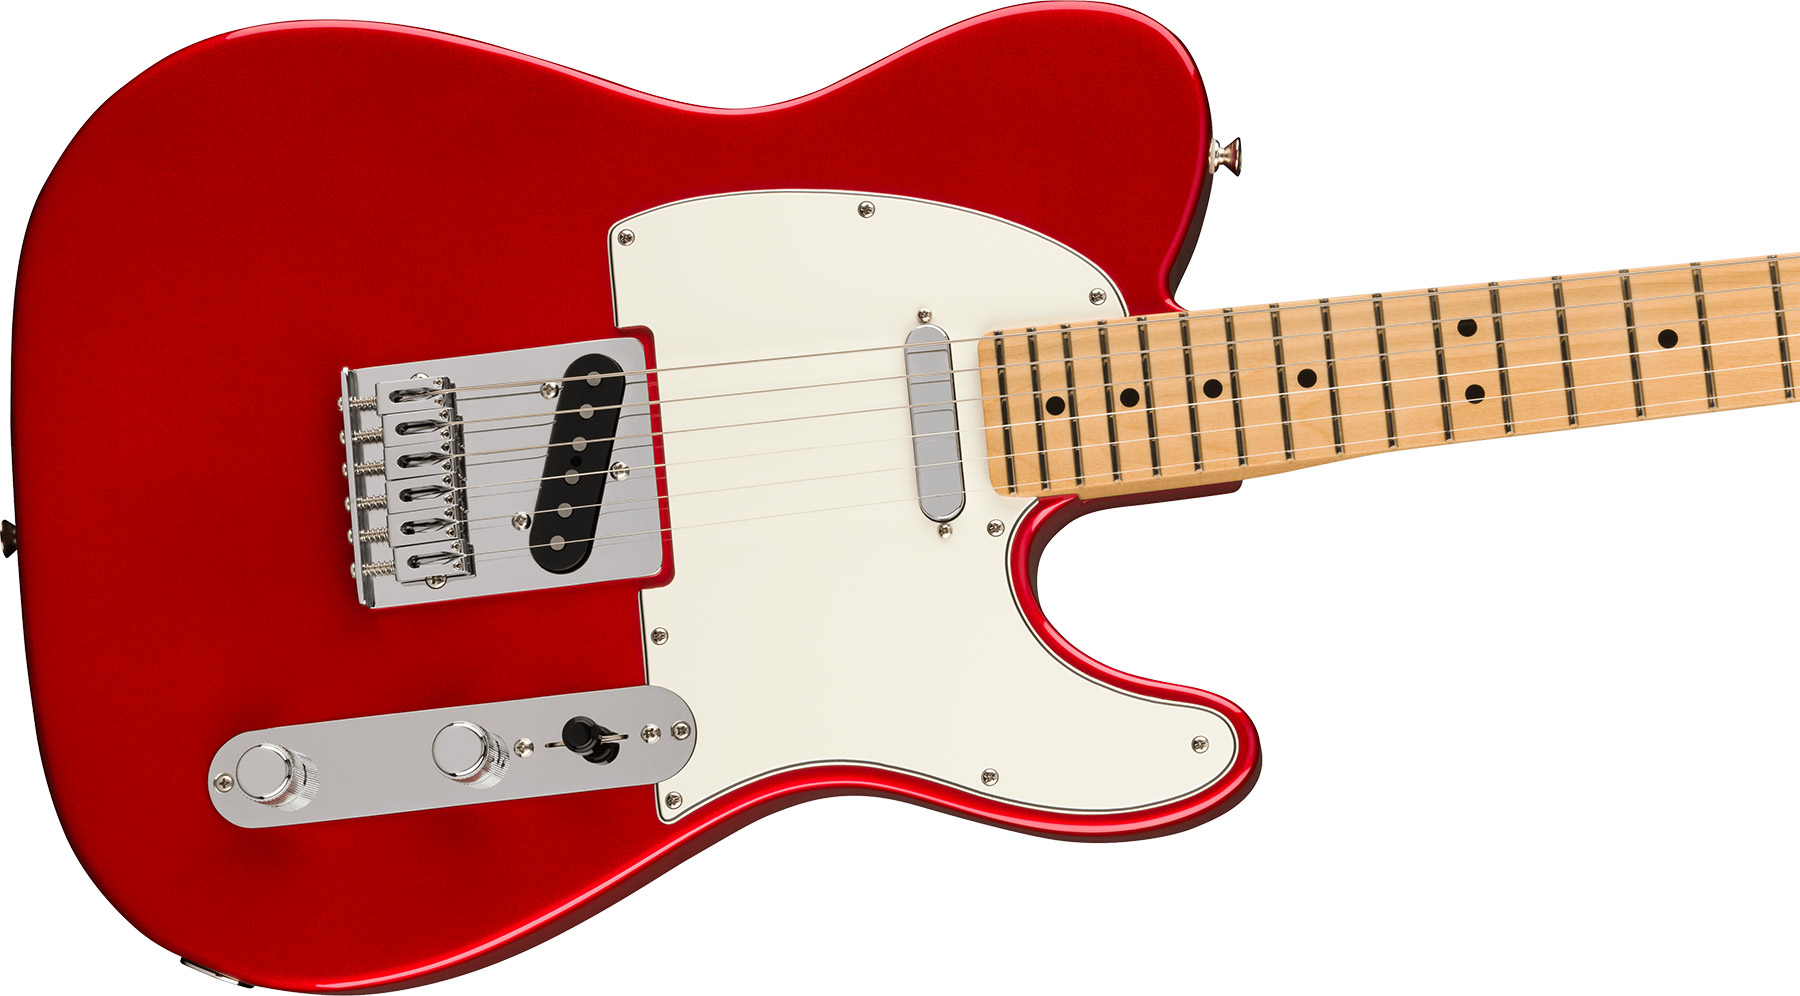 Fender Tele Player Mex 2023 2s Ht Mn - Candy Apple Red - Tel shape electric guitar - Variation 2